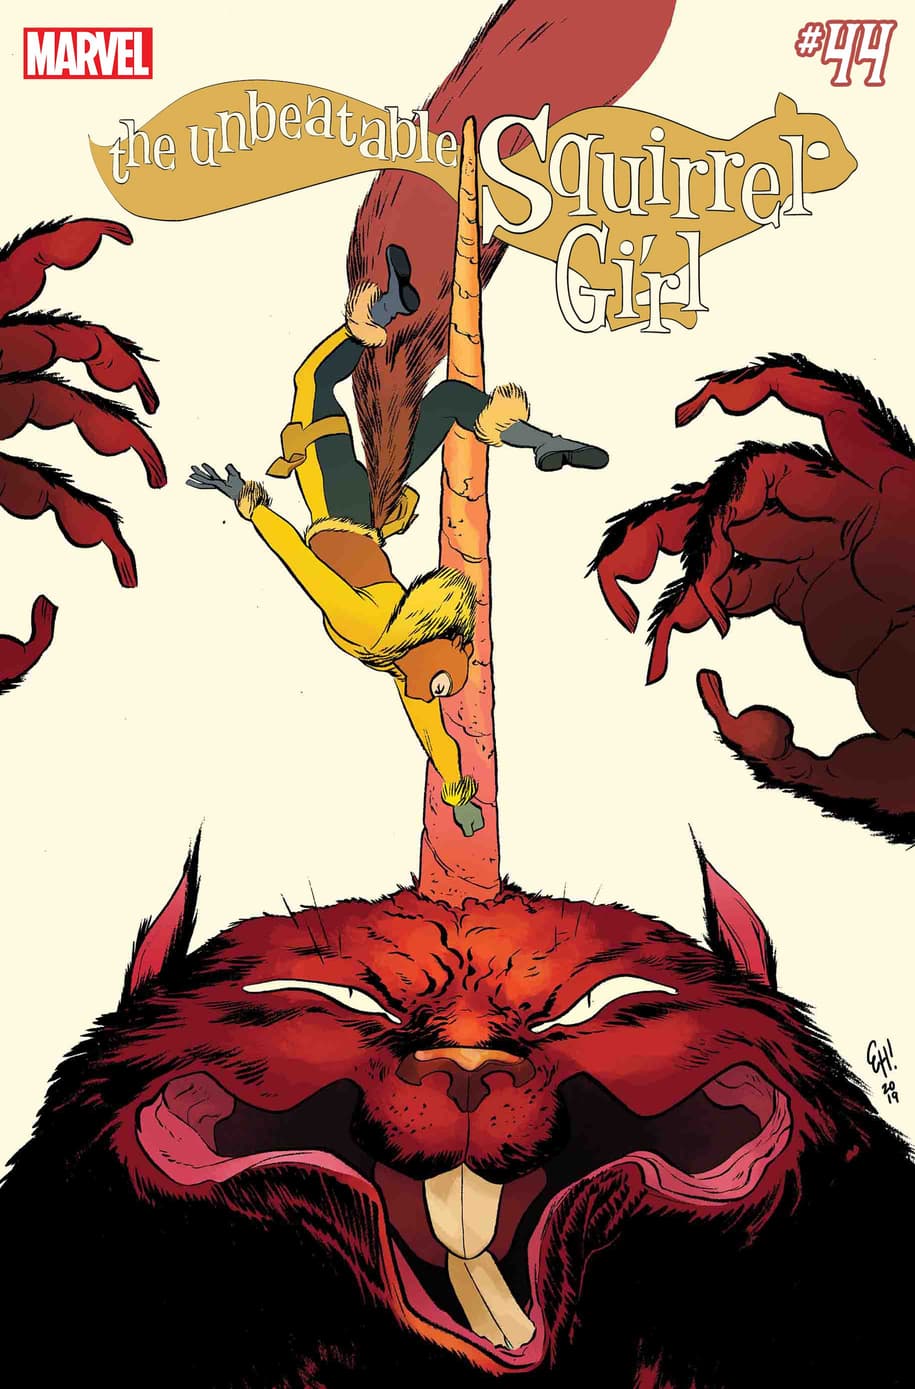 'Unbeatable Squirrel Girl' Joins the 'War of the Realms' Action - News - Marvel - 웹